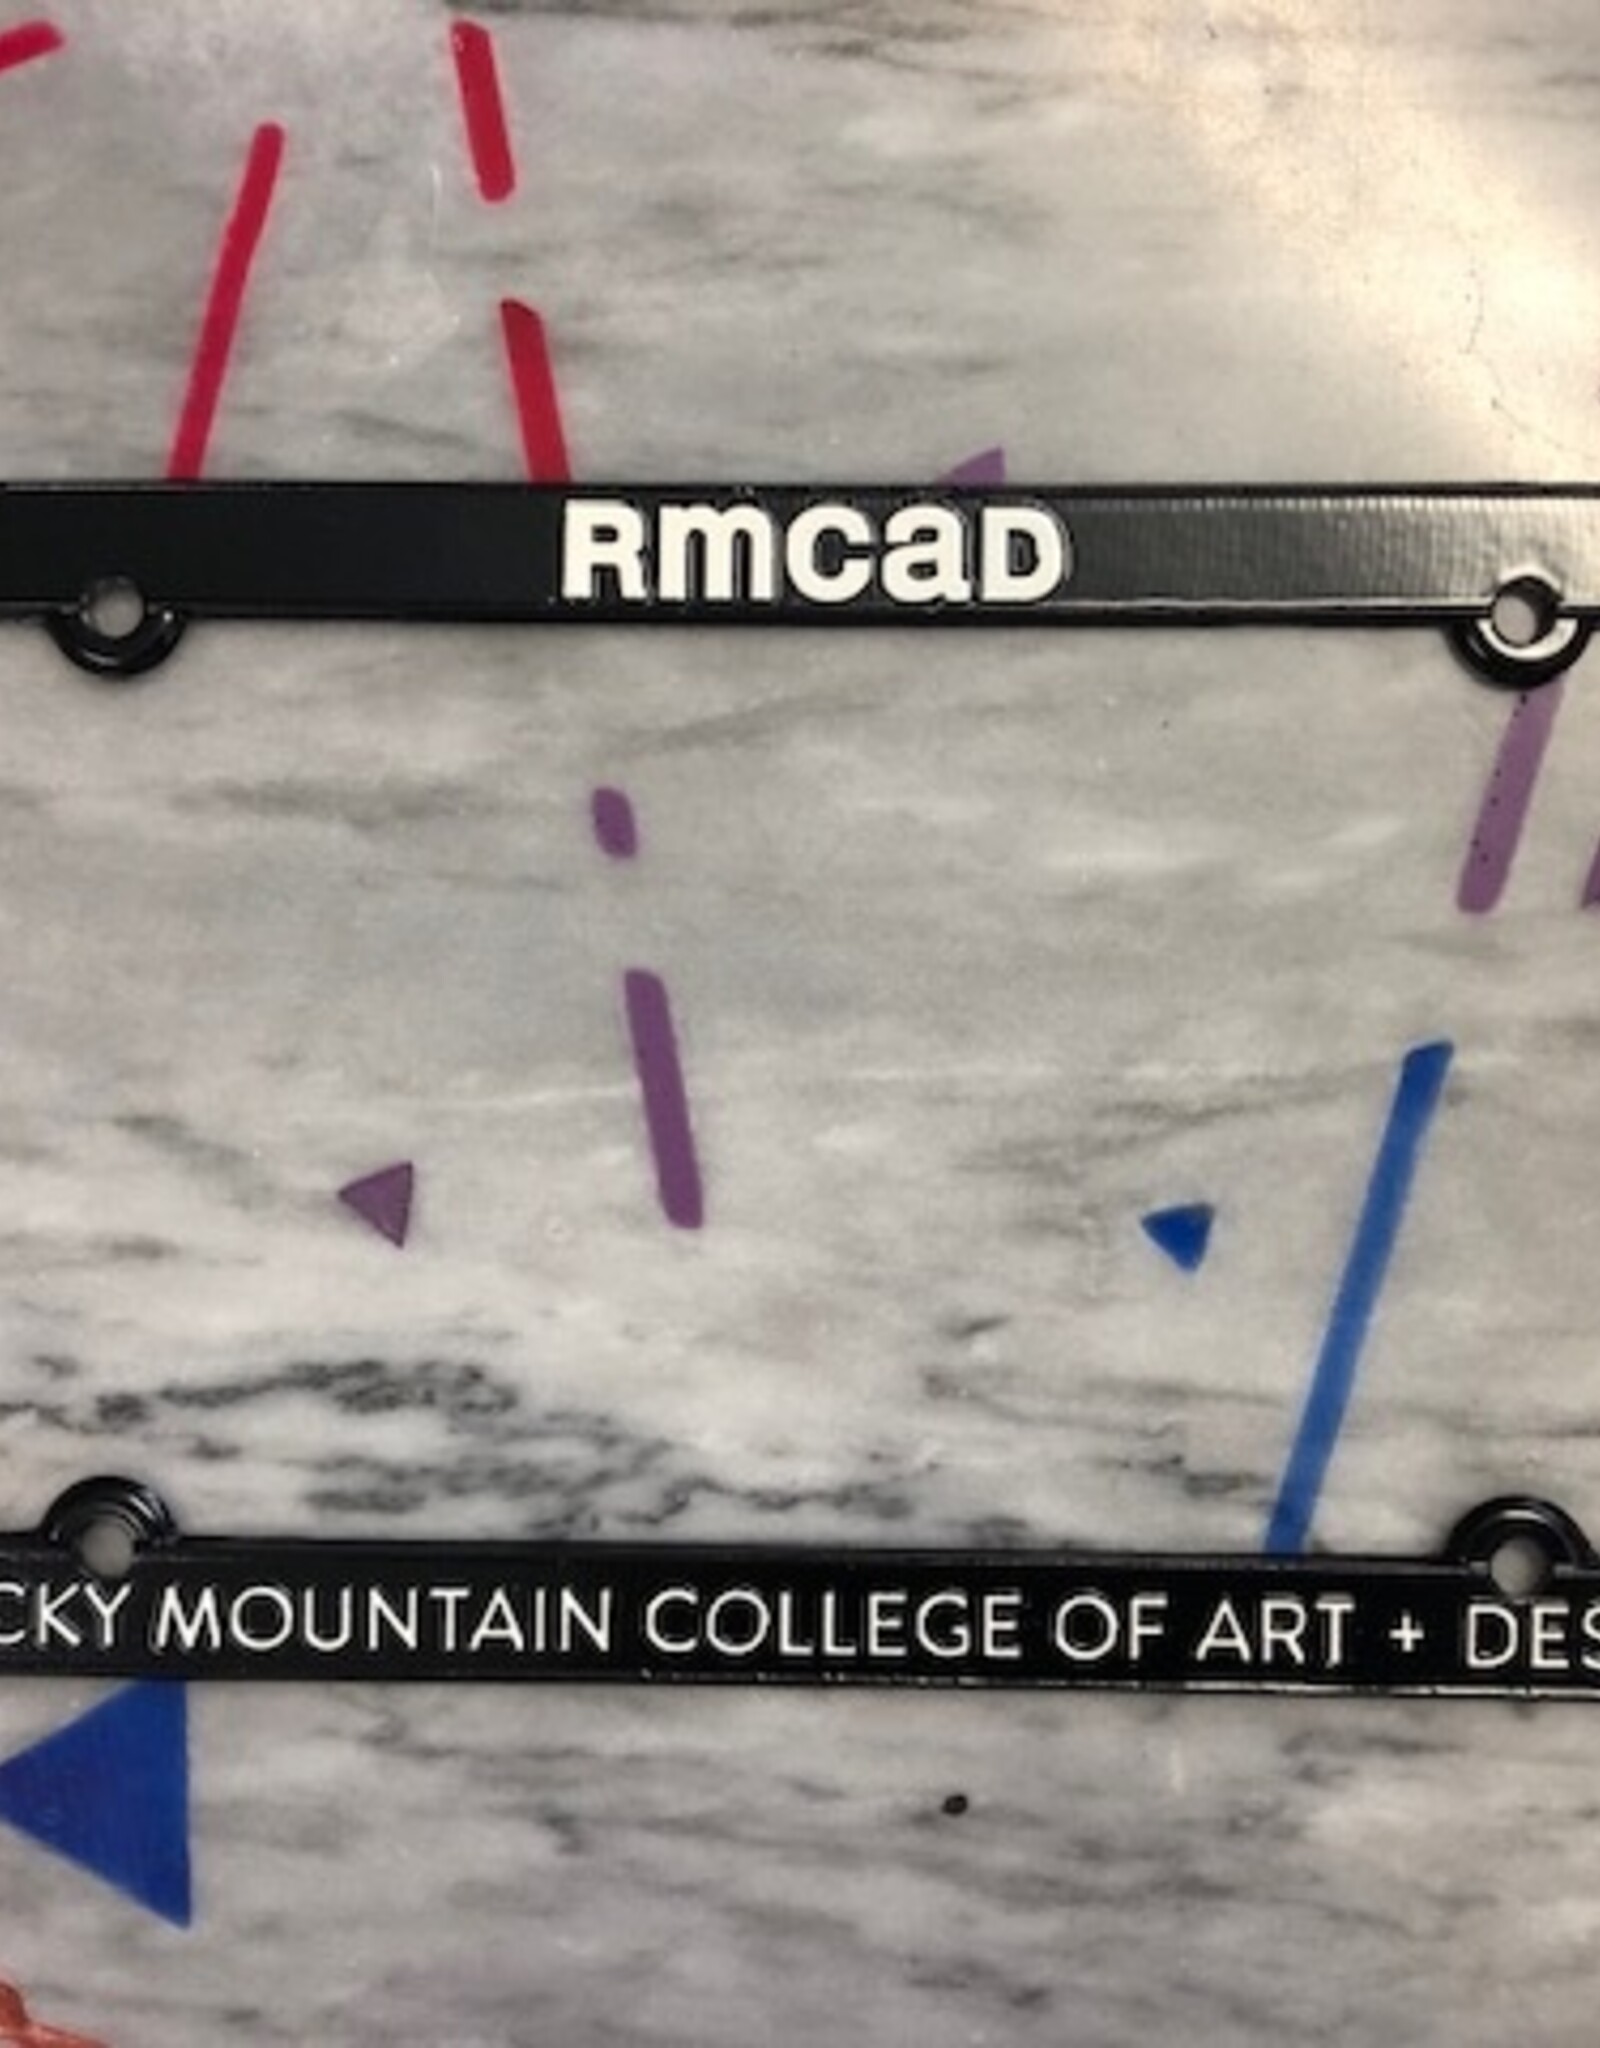 RMCAD License Plate Cover